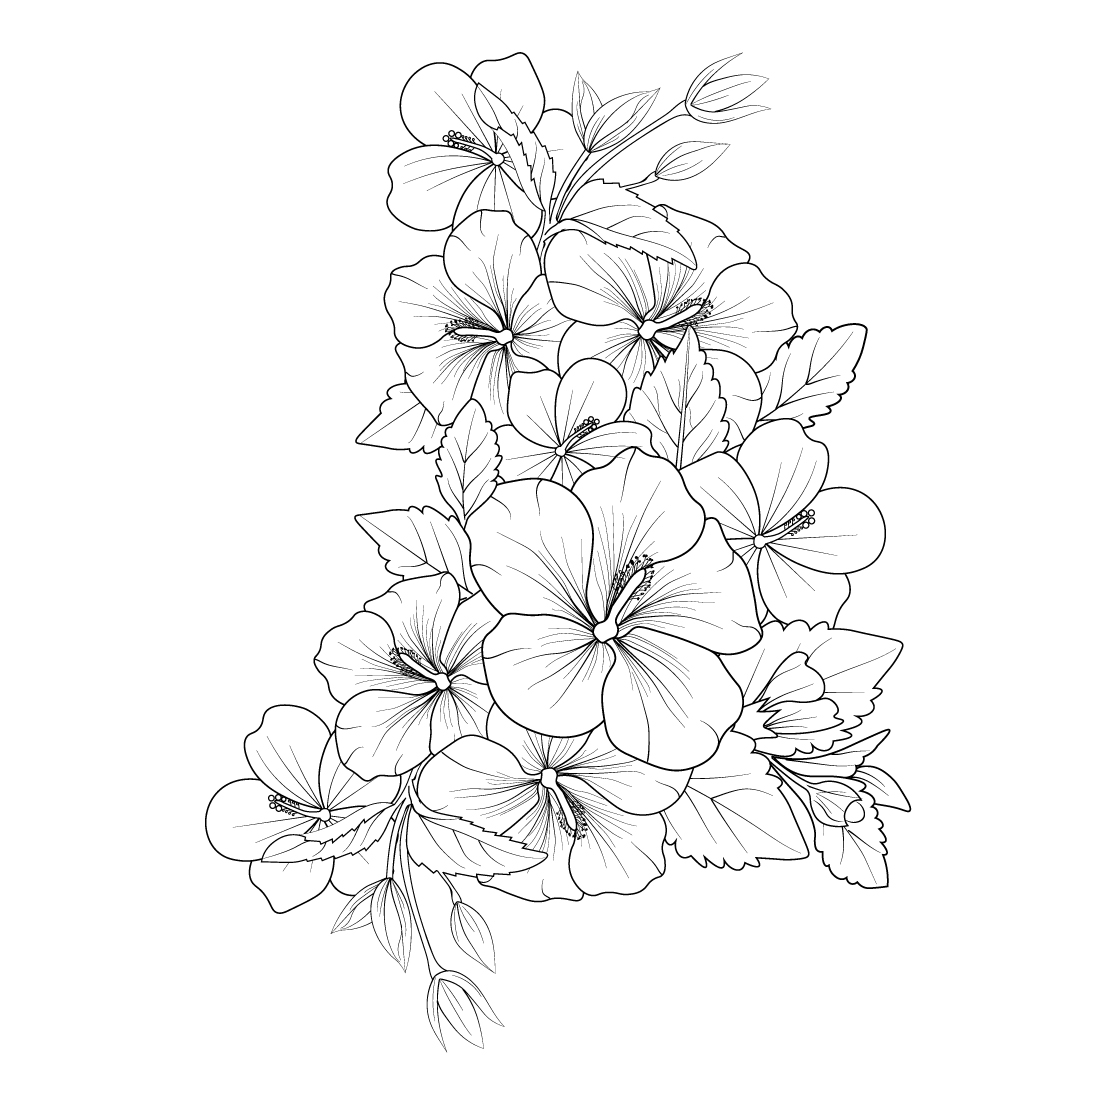 Hibiscus flower vector illustration of a beautiful flower bouquet, a hand-drawn artistic coloring book cover image.